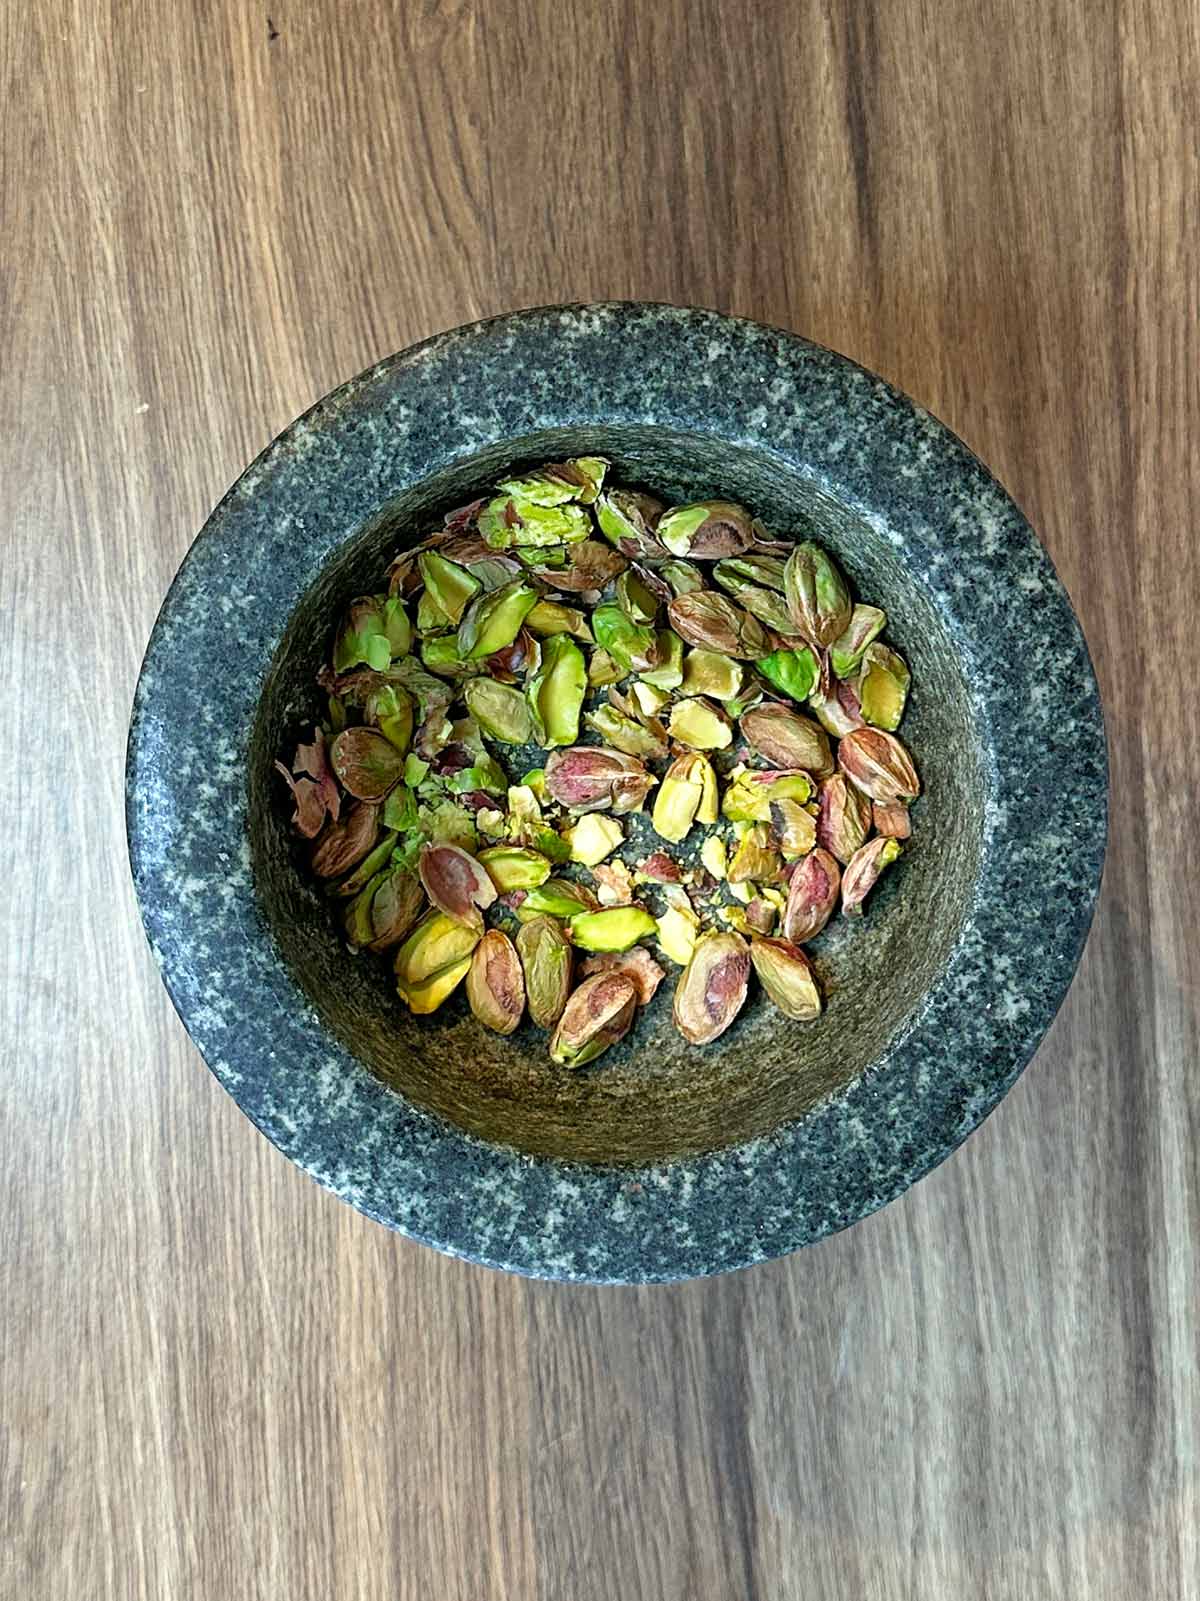 Shelled pistachios in a mortar bowl.